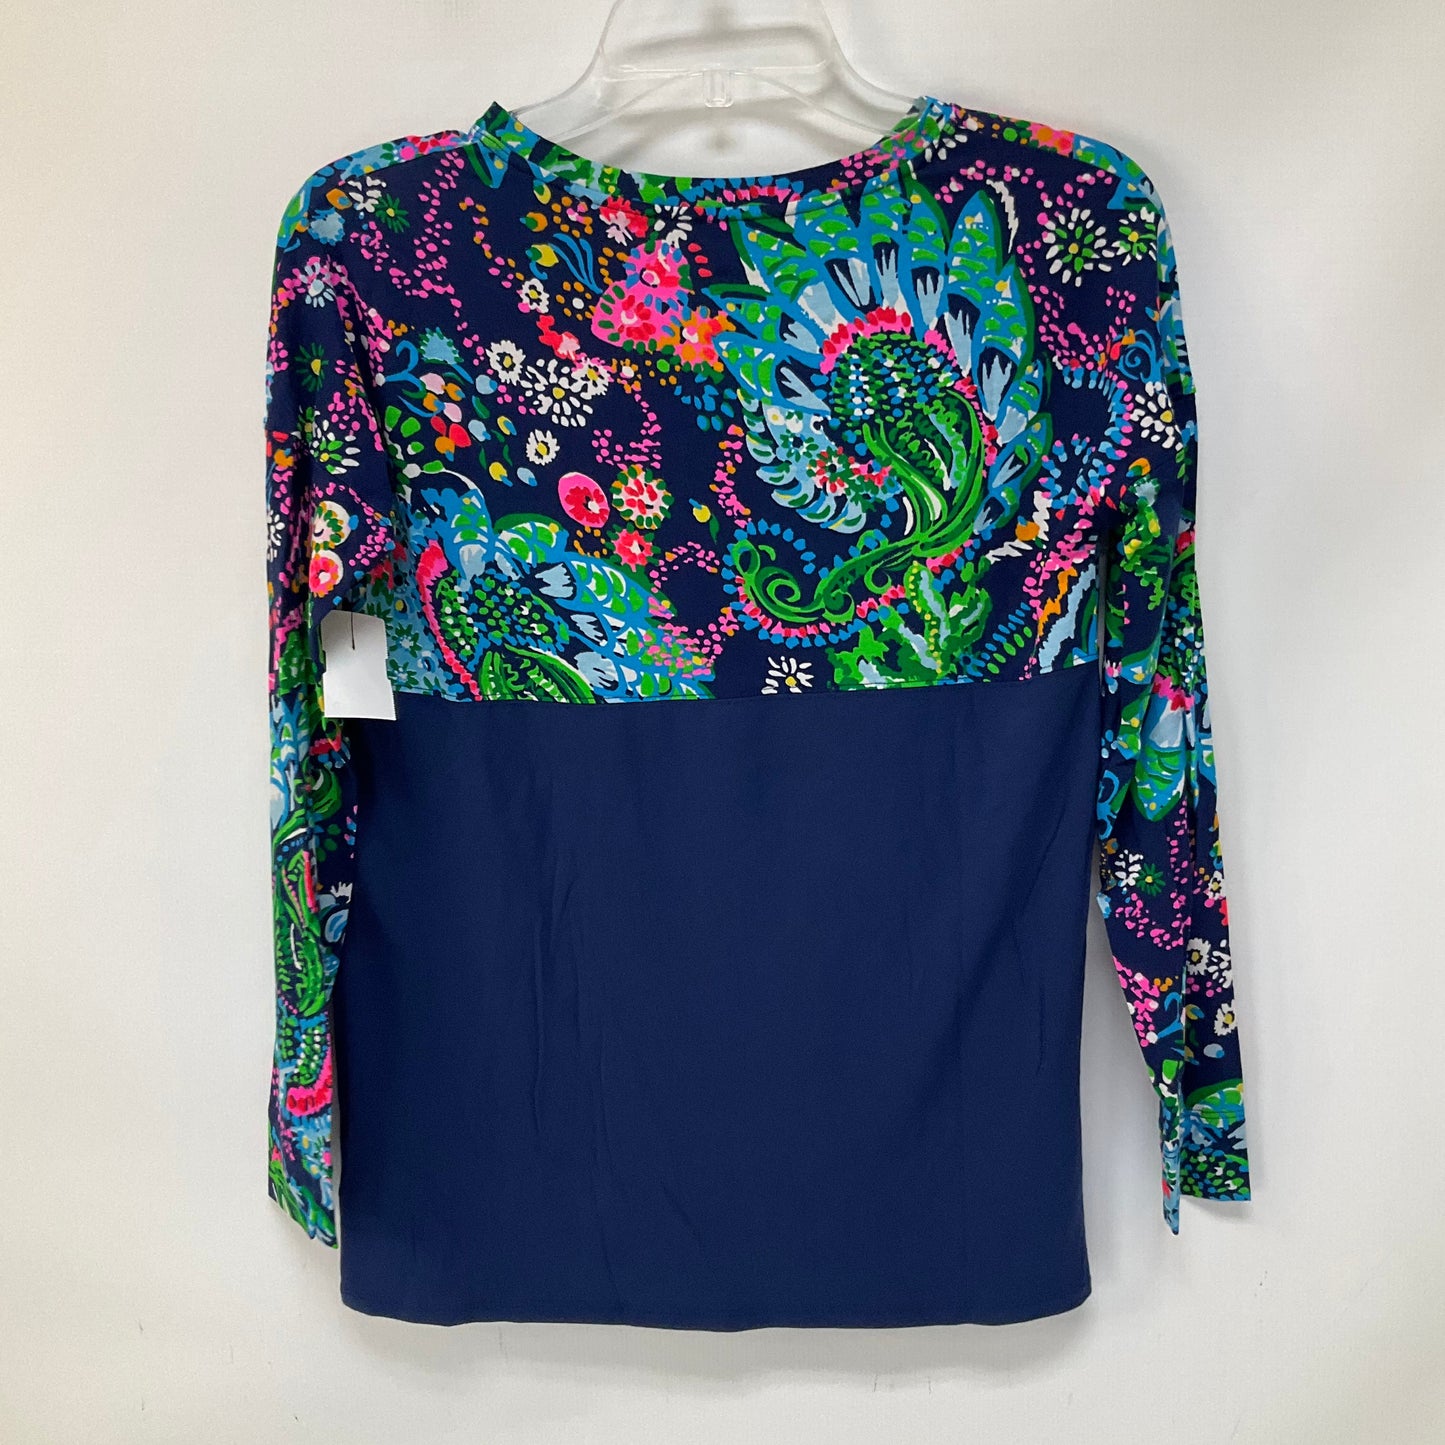 Multi-colored Top Long Sleeve Lilly Pulitzer, Size Xxs